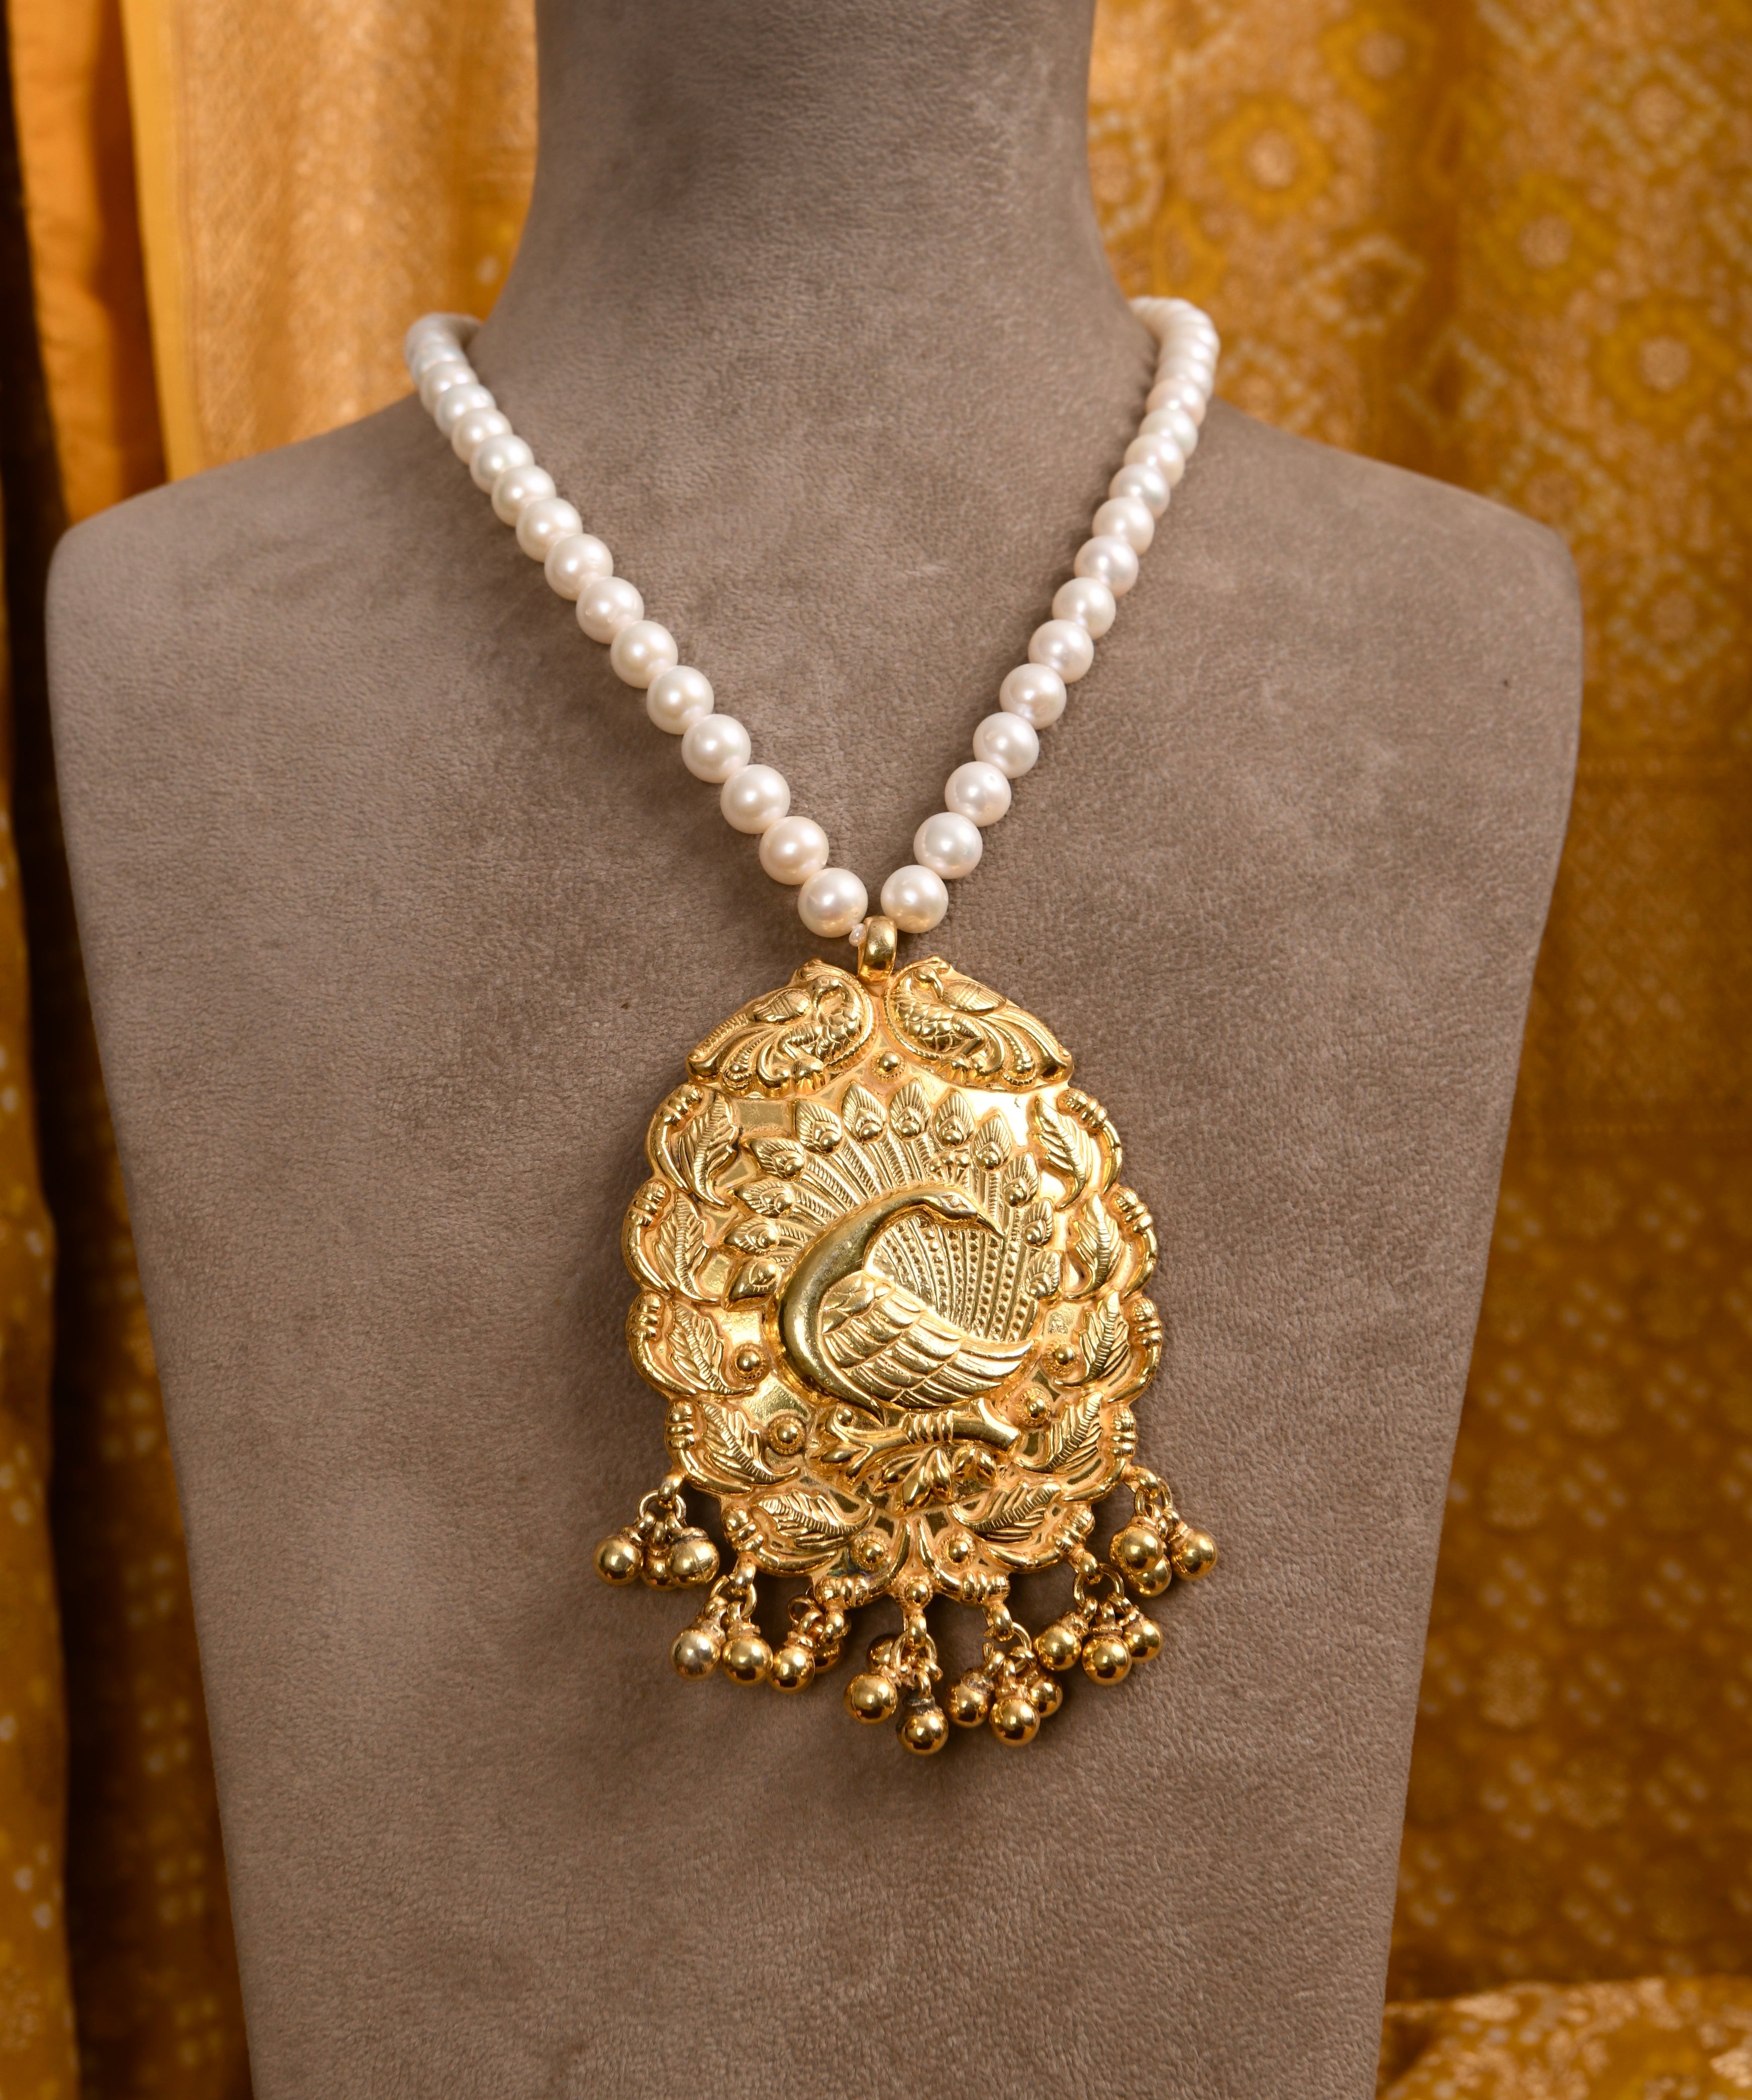 Gold Necklace with CZ Peacock Pendant ~ Latest Jewellery Designs | Gold  pendant jewelry, Jewelry design necklace, Gold necklace designs